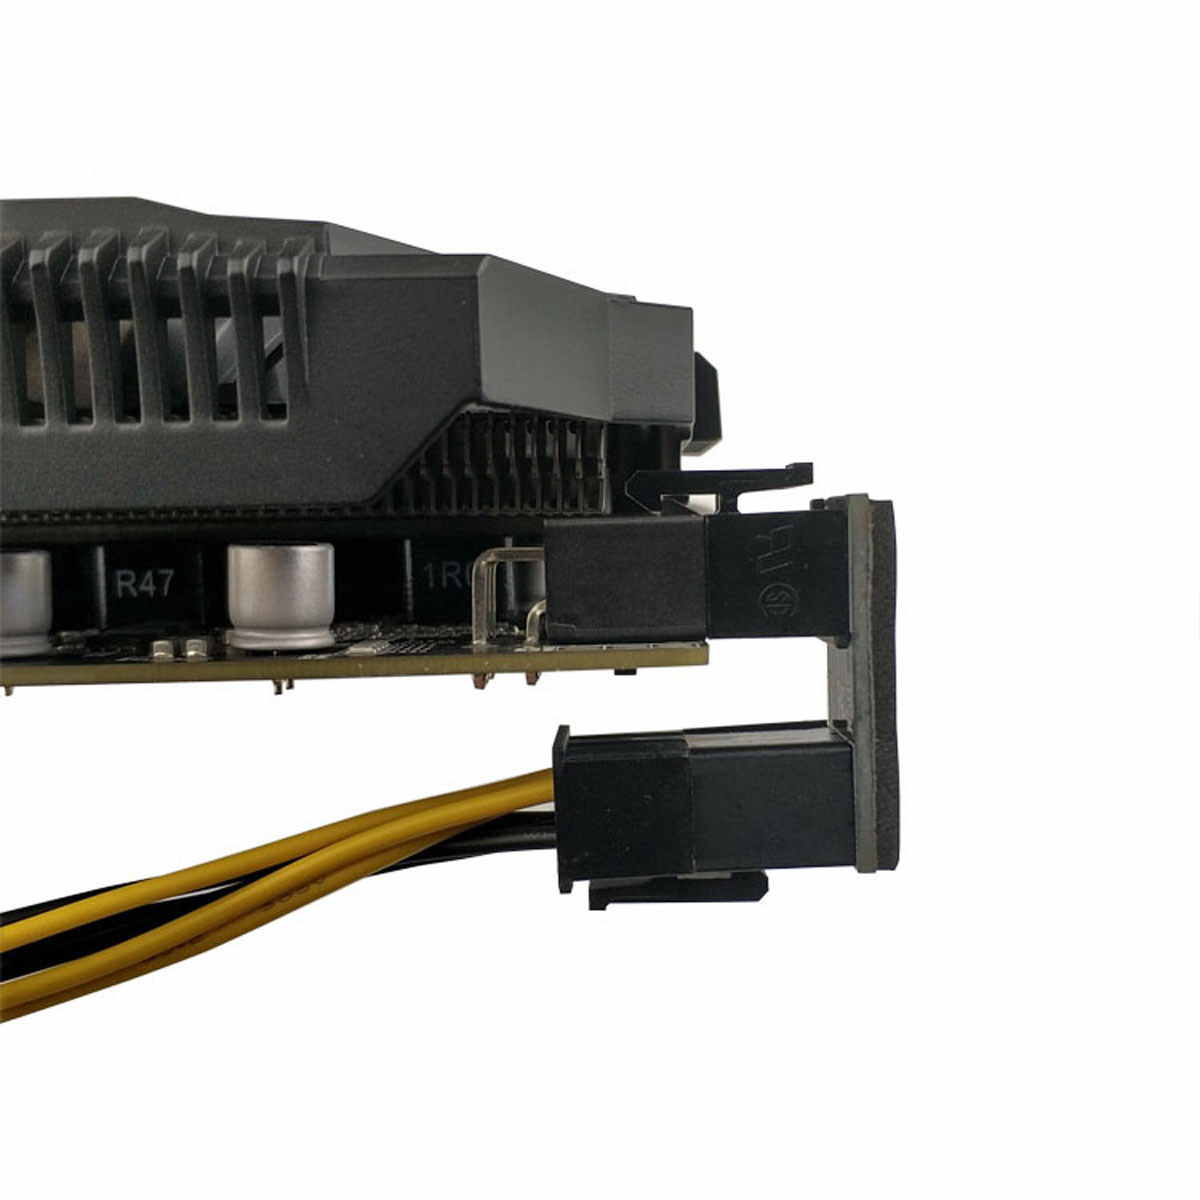 A large marketing image providing additional information about the product GamerChief 8-Pin PCIe 90 Degree Adapter Black Type A - Additional alt info not provided